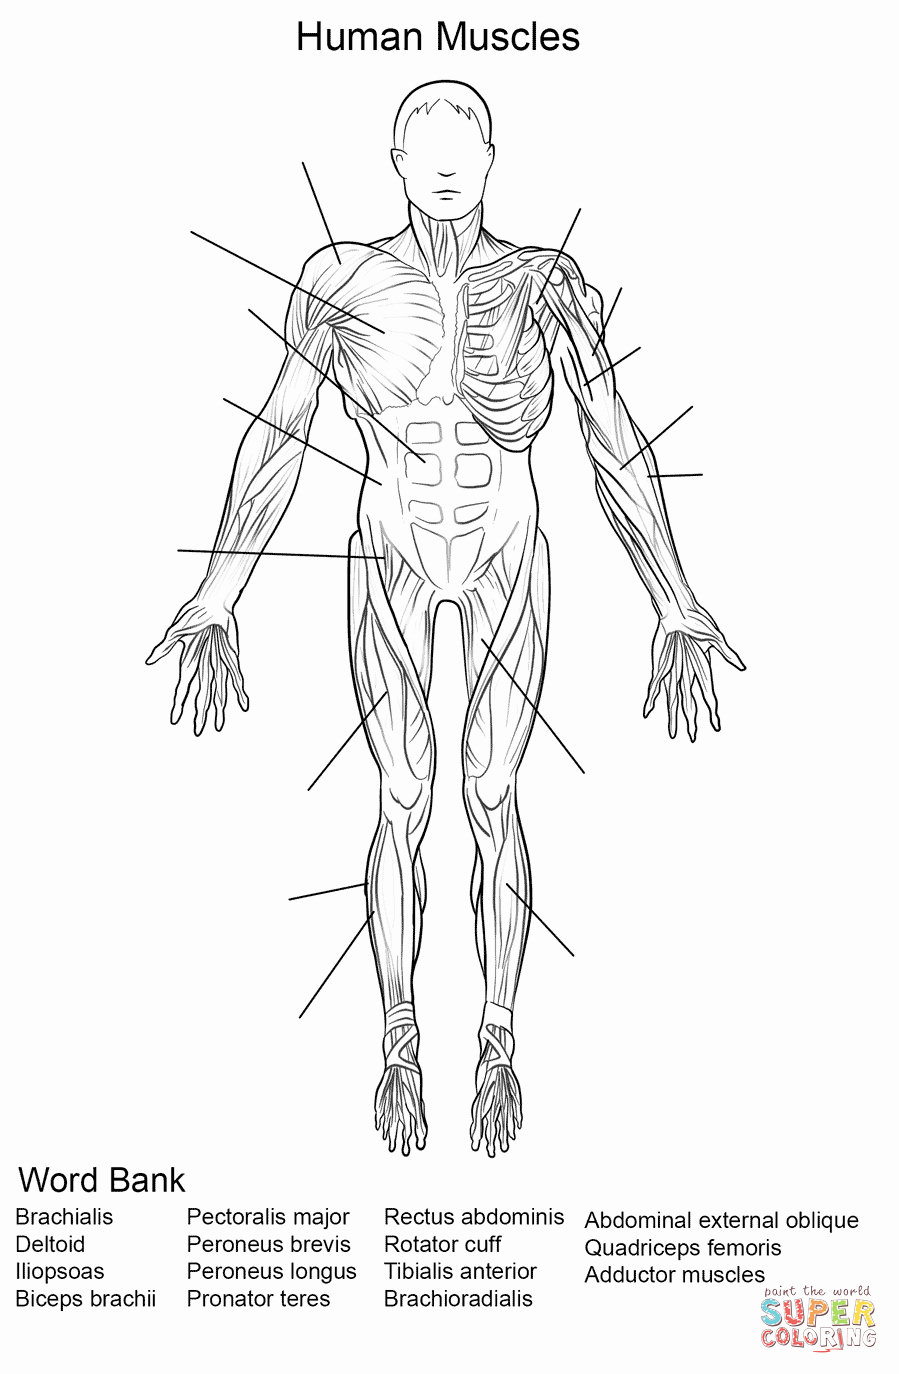 Muscle Diagram Worksheets Lovely Human Muscles Front View Worksheet Coloring Page